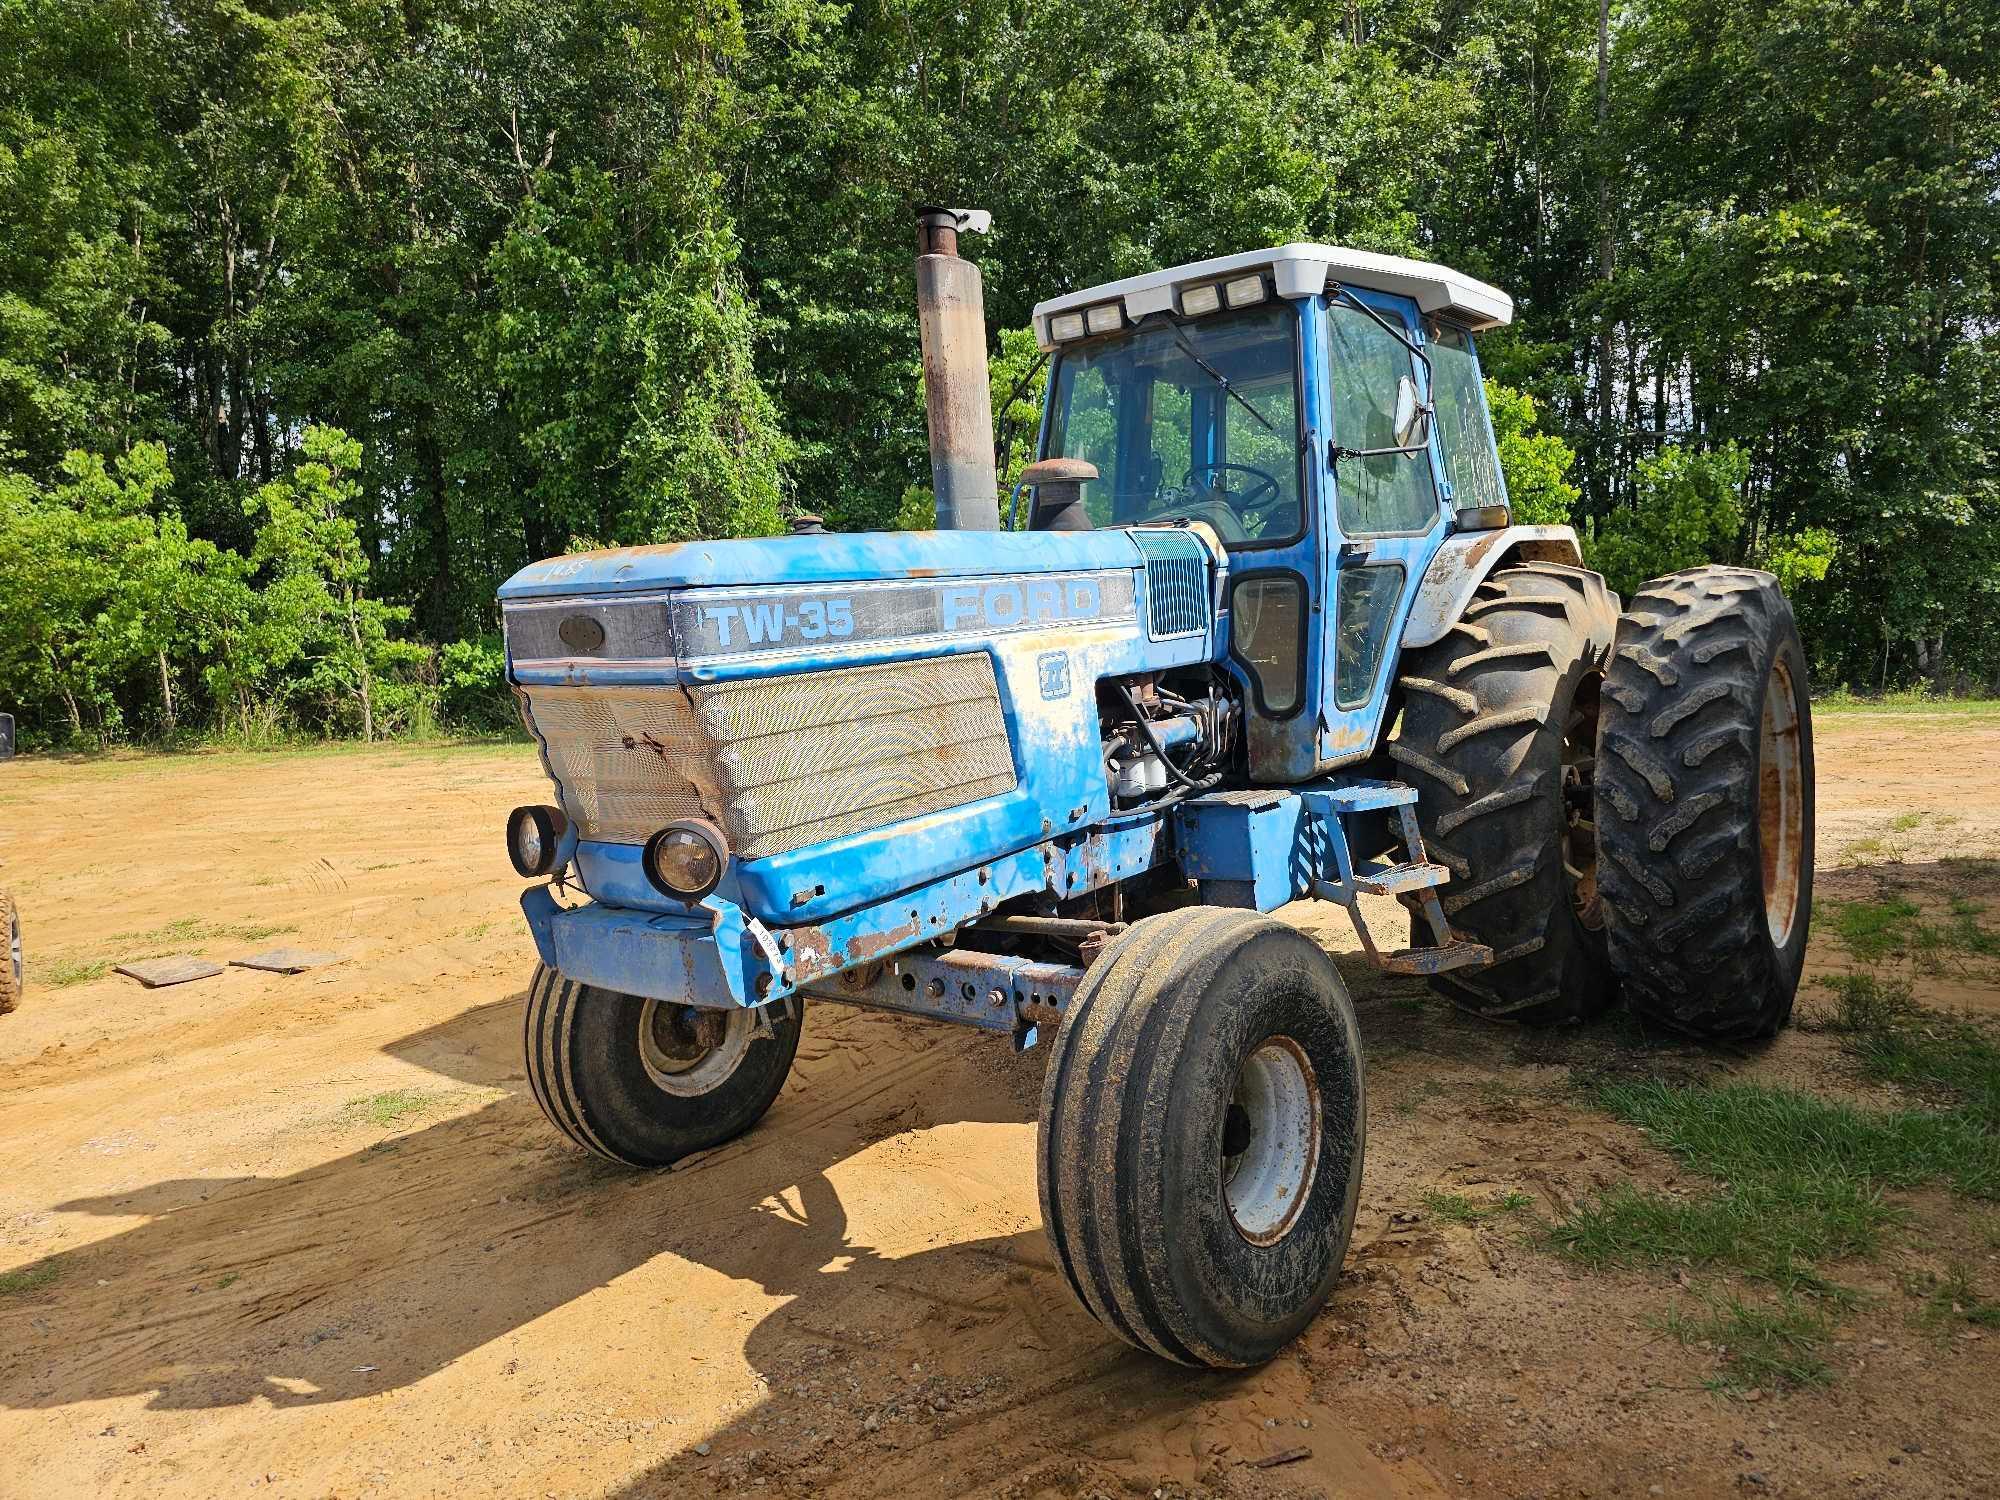 1085 - FORD TW-35 2WD CAB TRACTOR